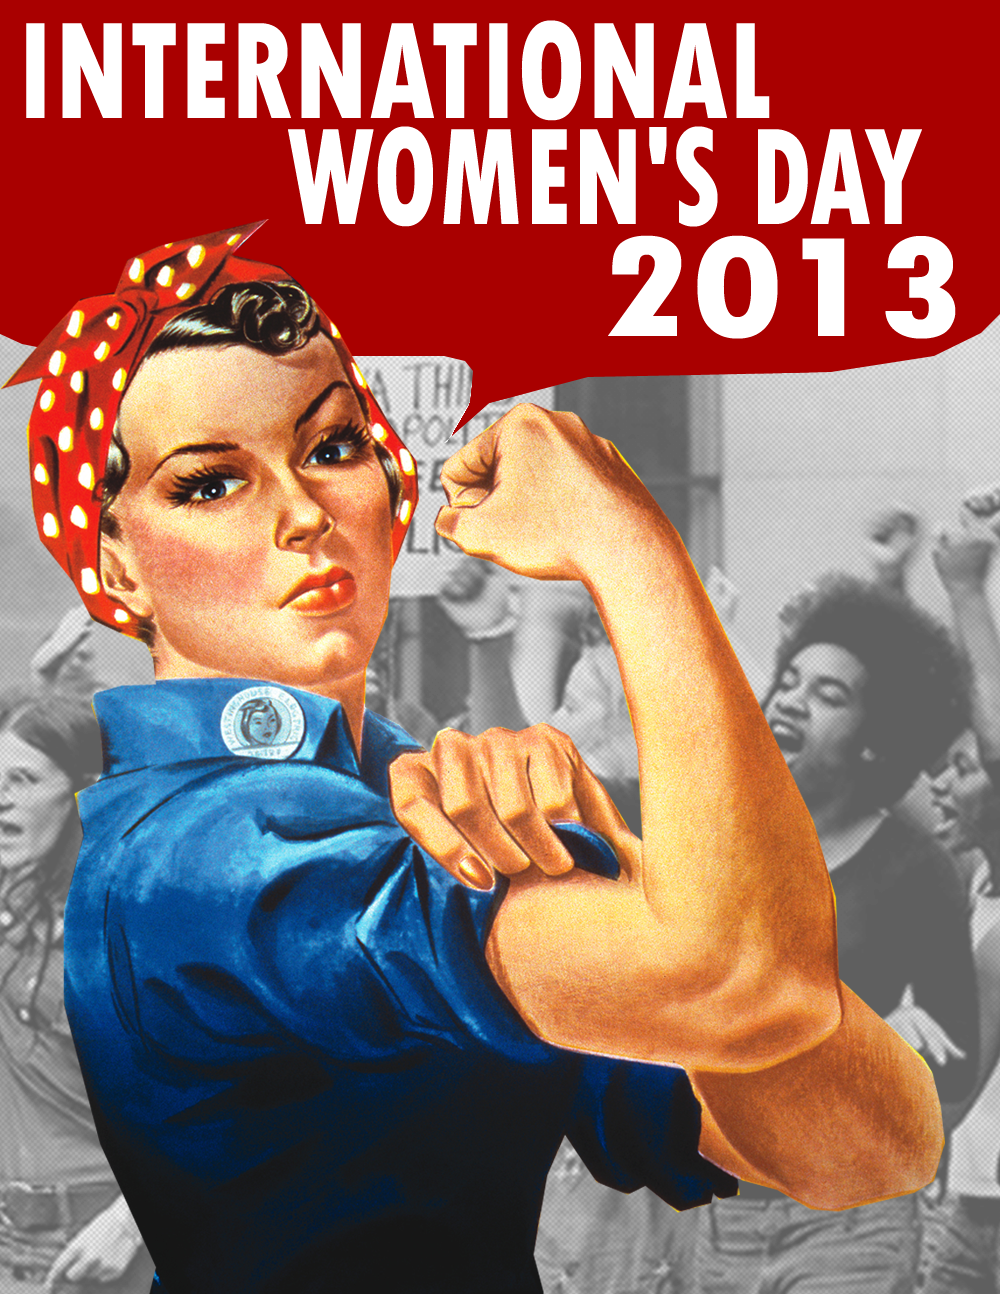 International Womens Day Poster By Party9999999 On Deviantart